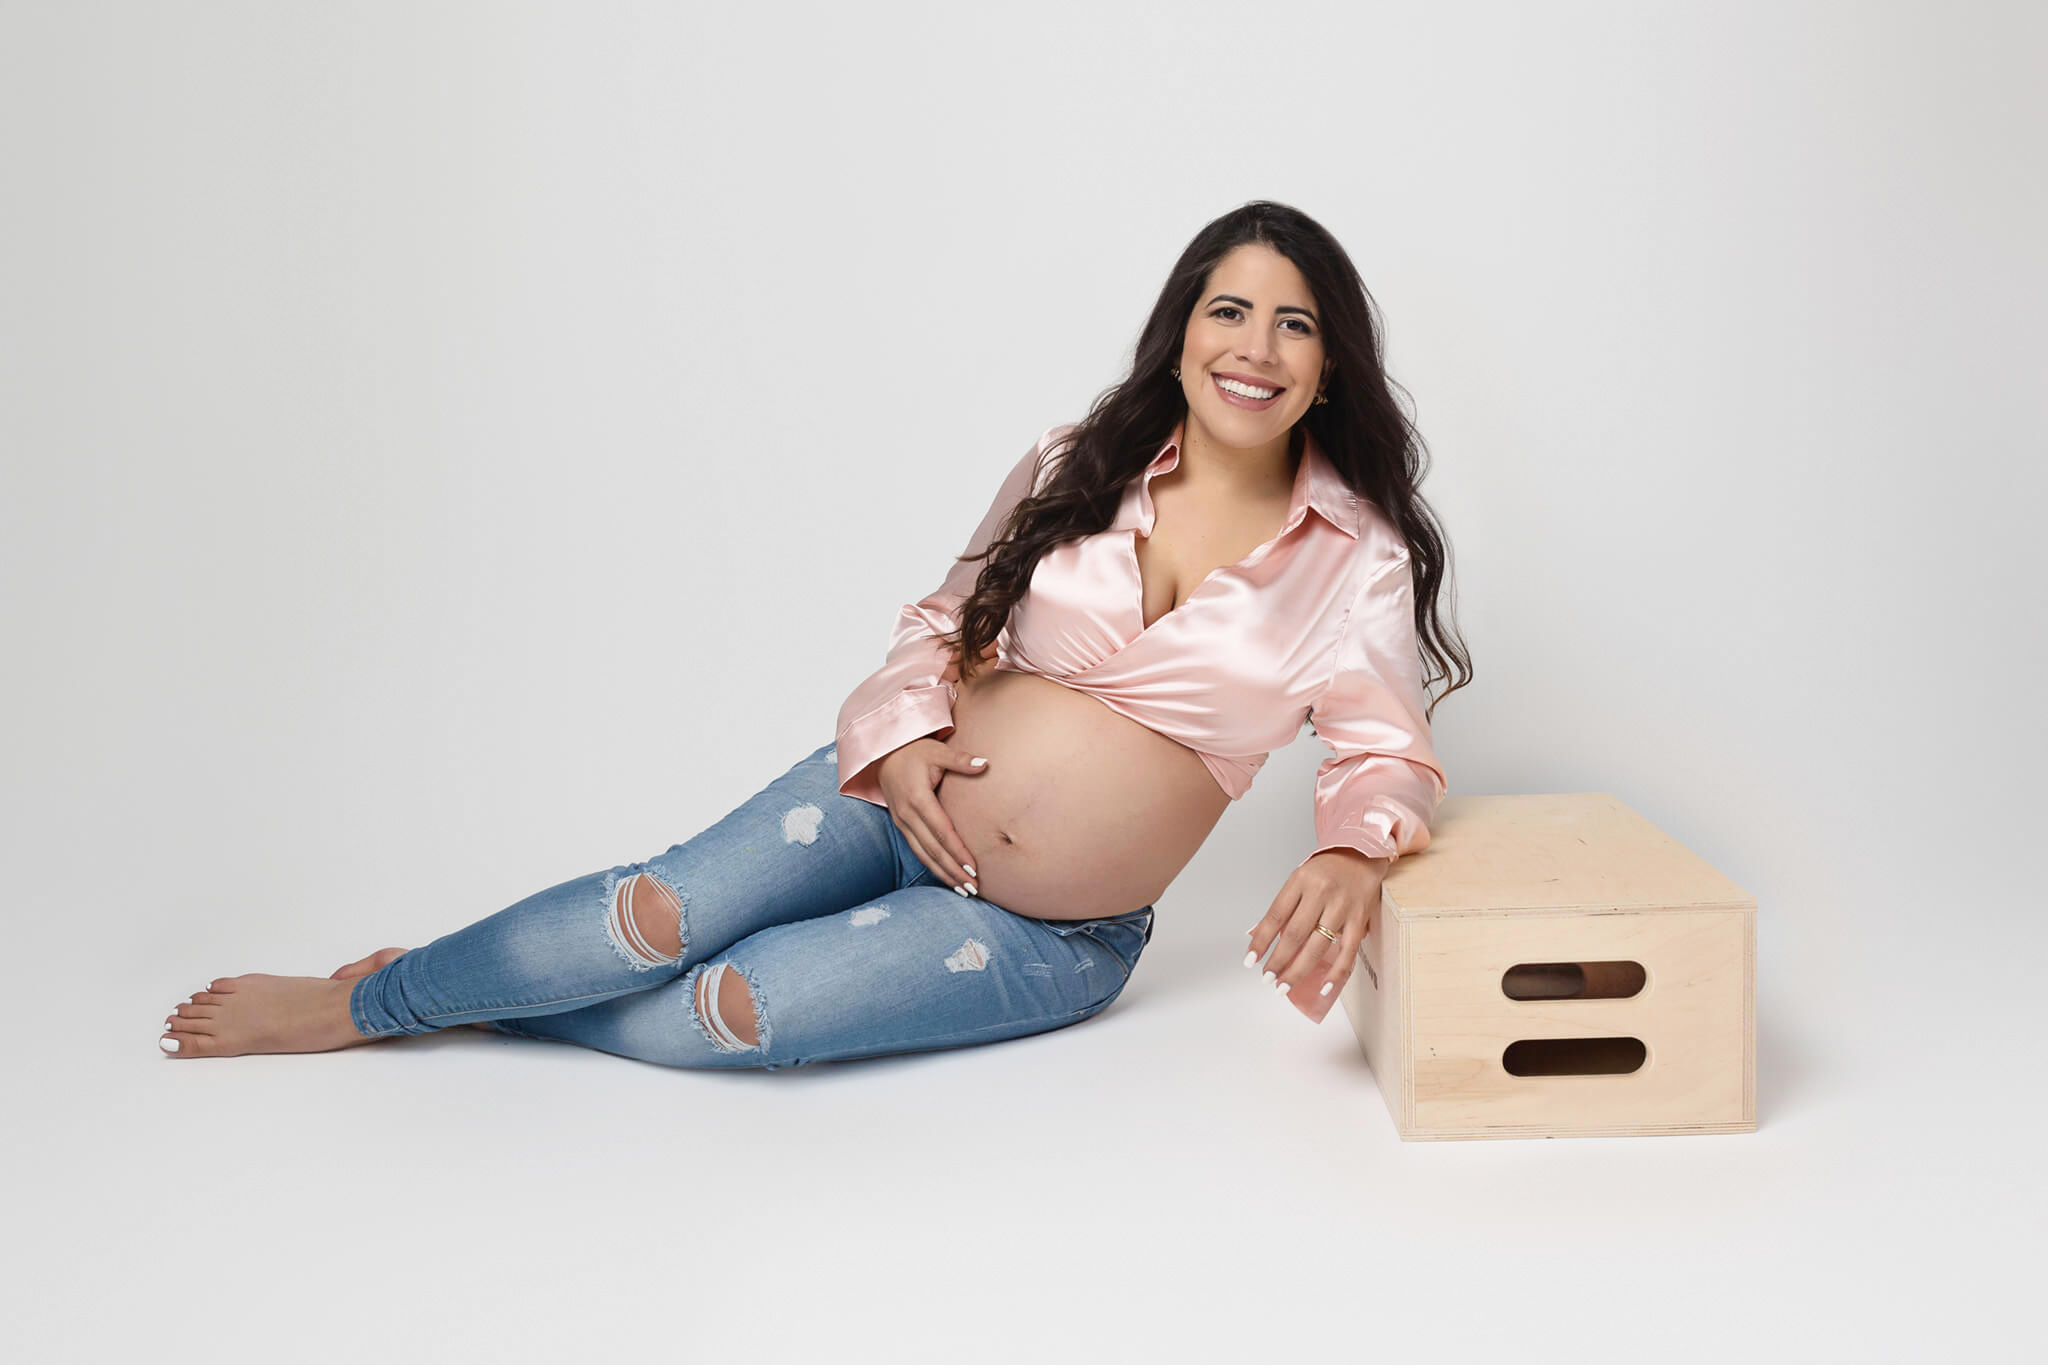 pregnant woman is posing wearing a pink top and jeans in her maternity photography session